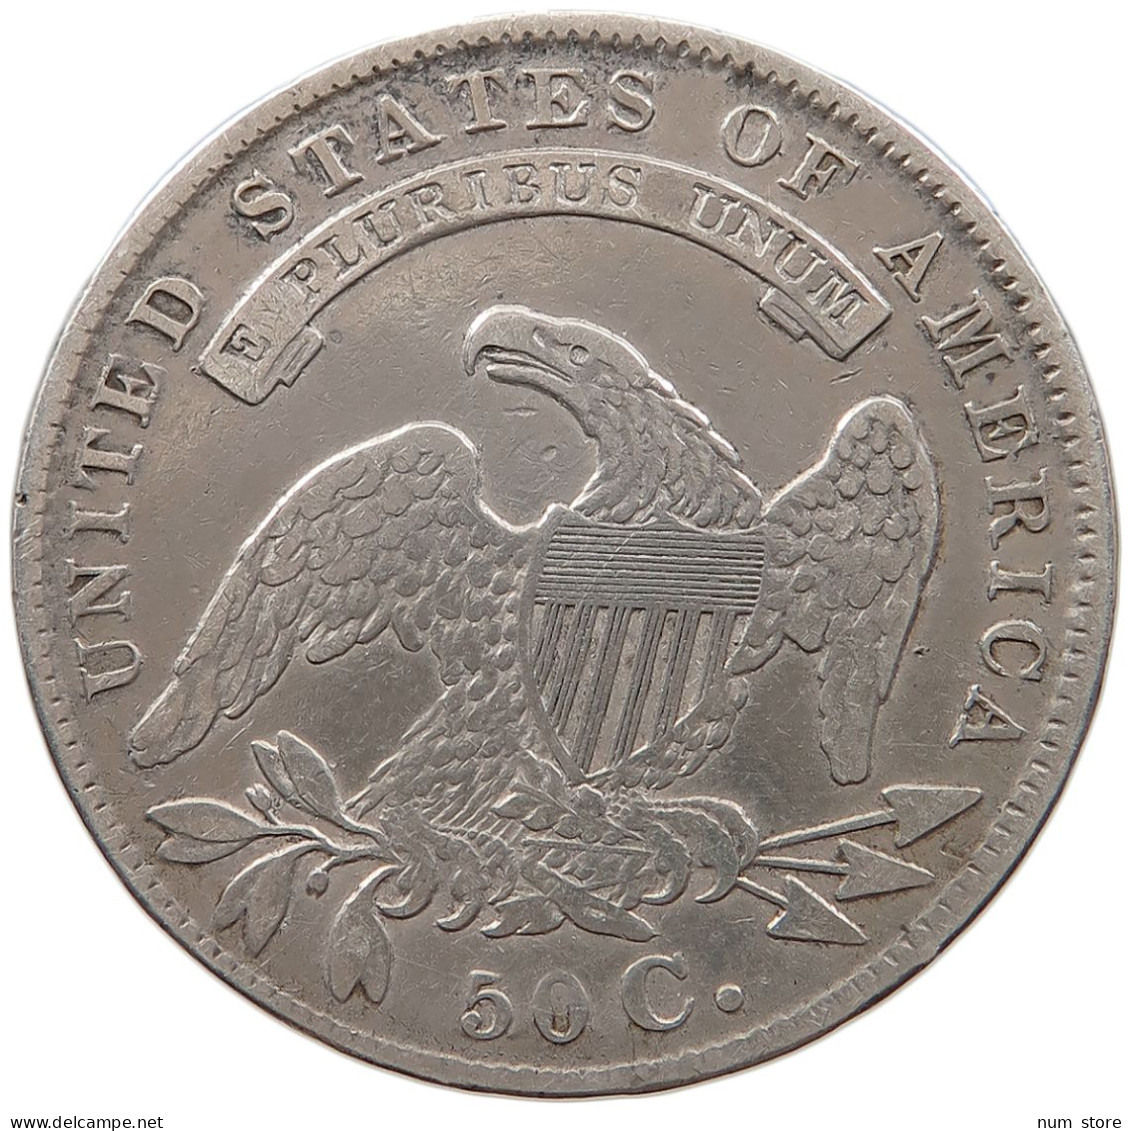 UNITED STATES OF AMERICA HALF DOLLAR 1836 CAPPED BUST #t141 0419 - 1794-1839: Early Halves (Prémices)